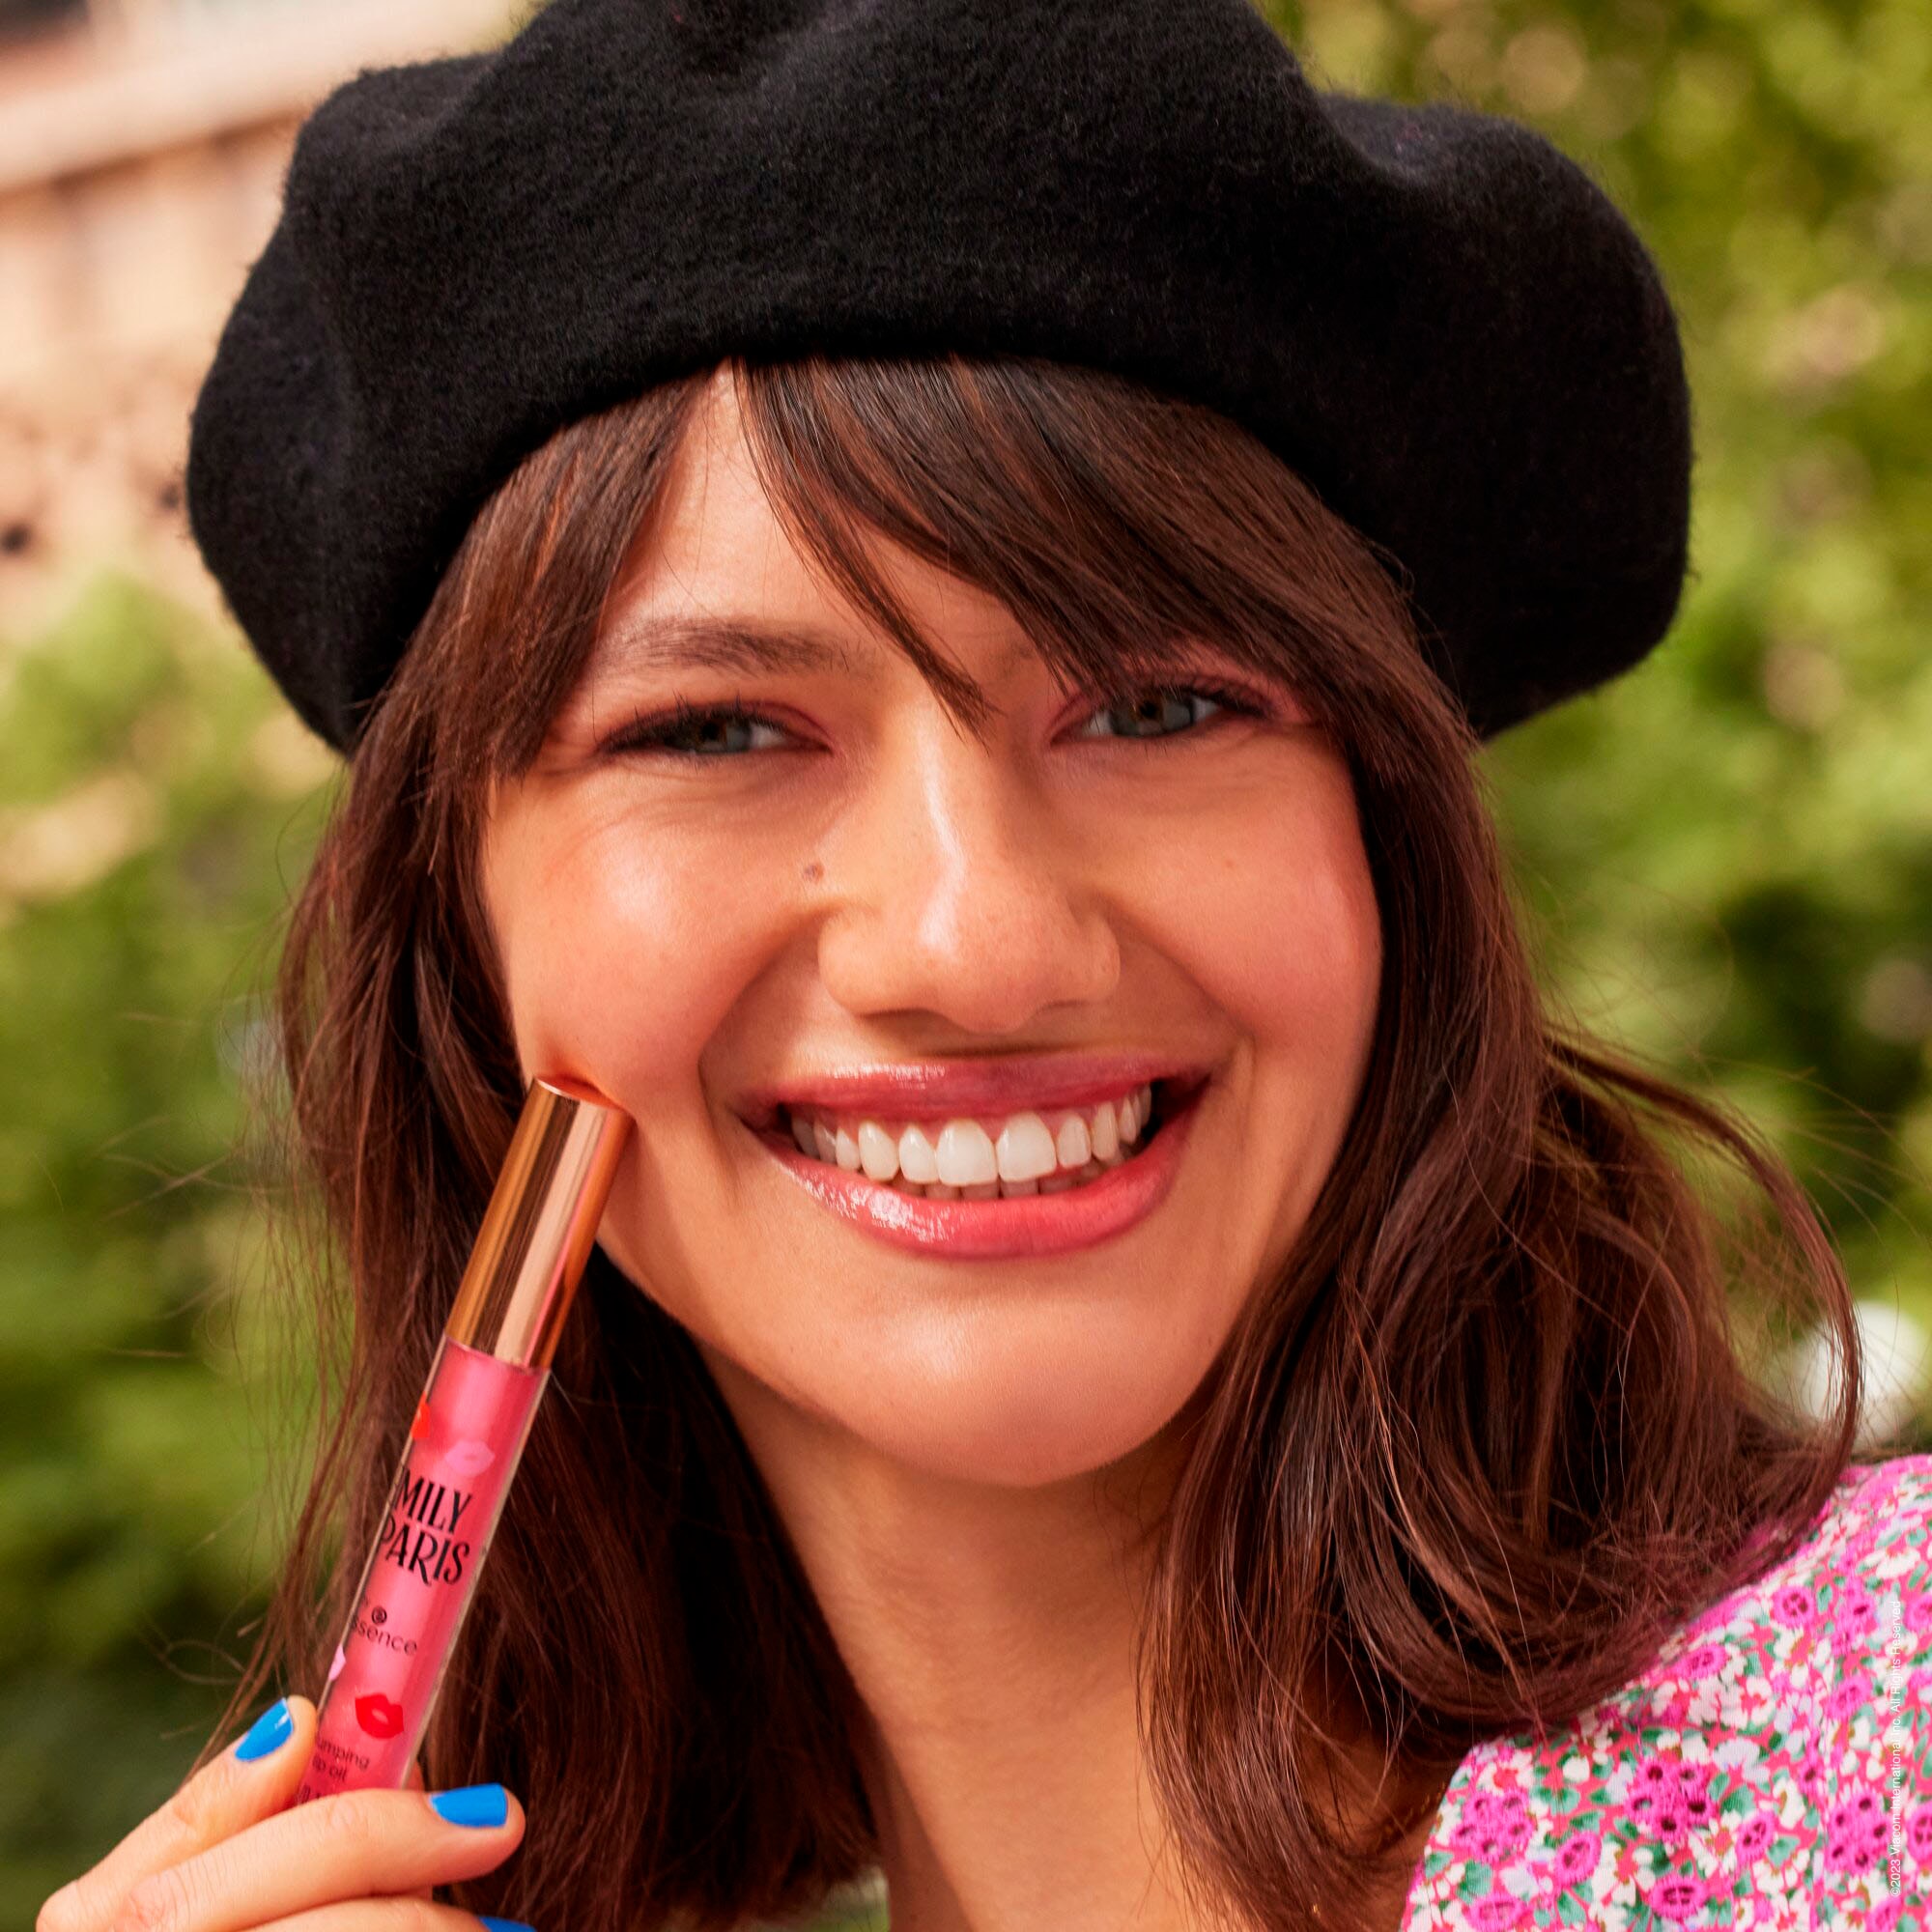 【auf Lager】 Essence Lipgloss »EMILY IN online by UNIVERSAL plumping PARIS oil« essence bei lip